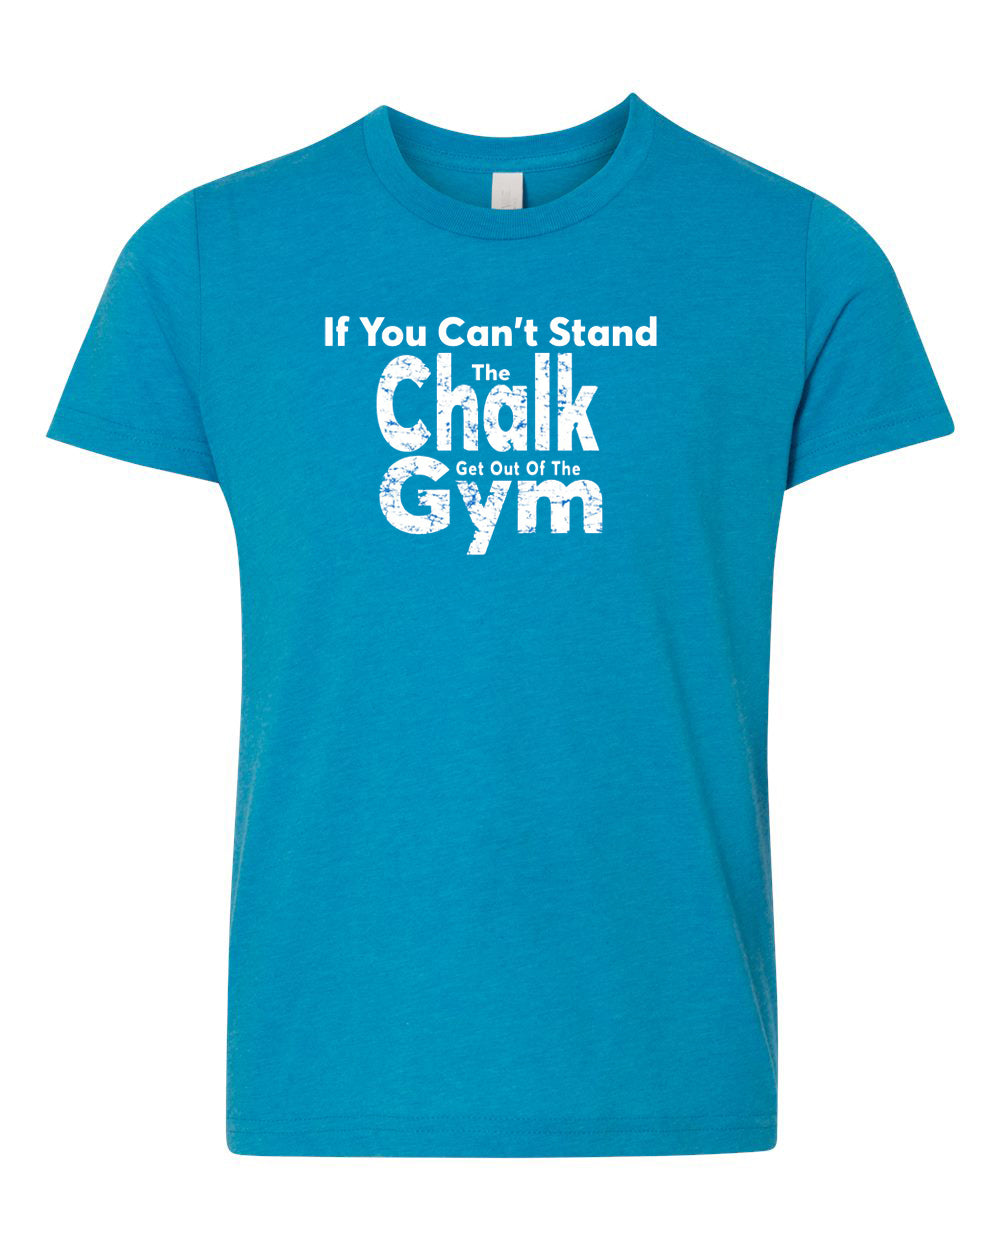 If You Can't Stand The Chalk Get Out Of The Gym Neon Youth T-Shirt Blue